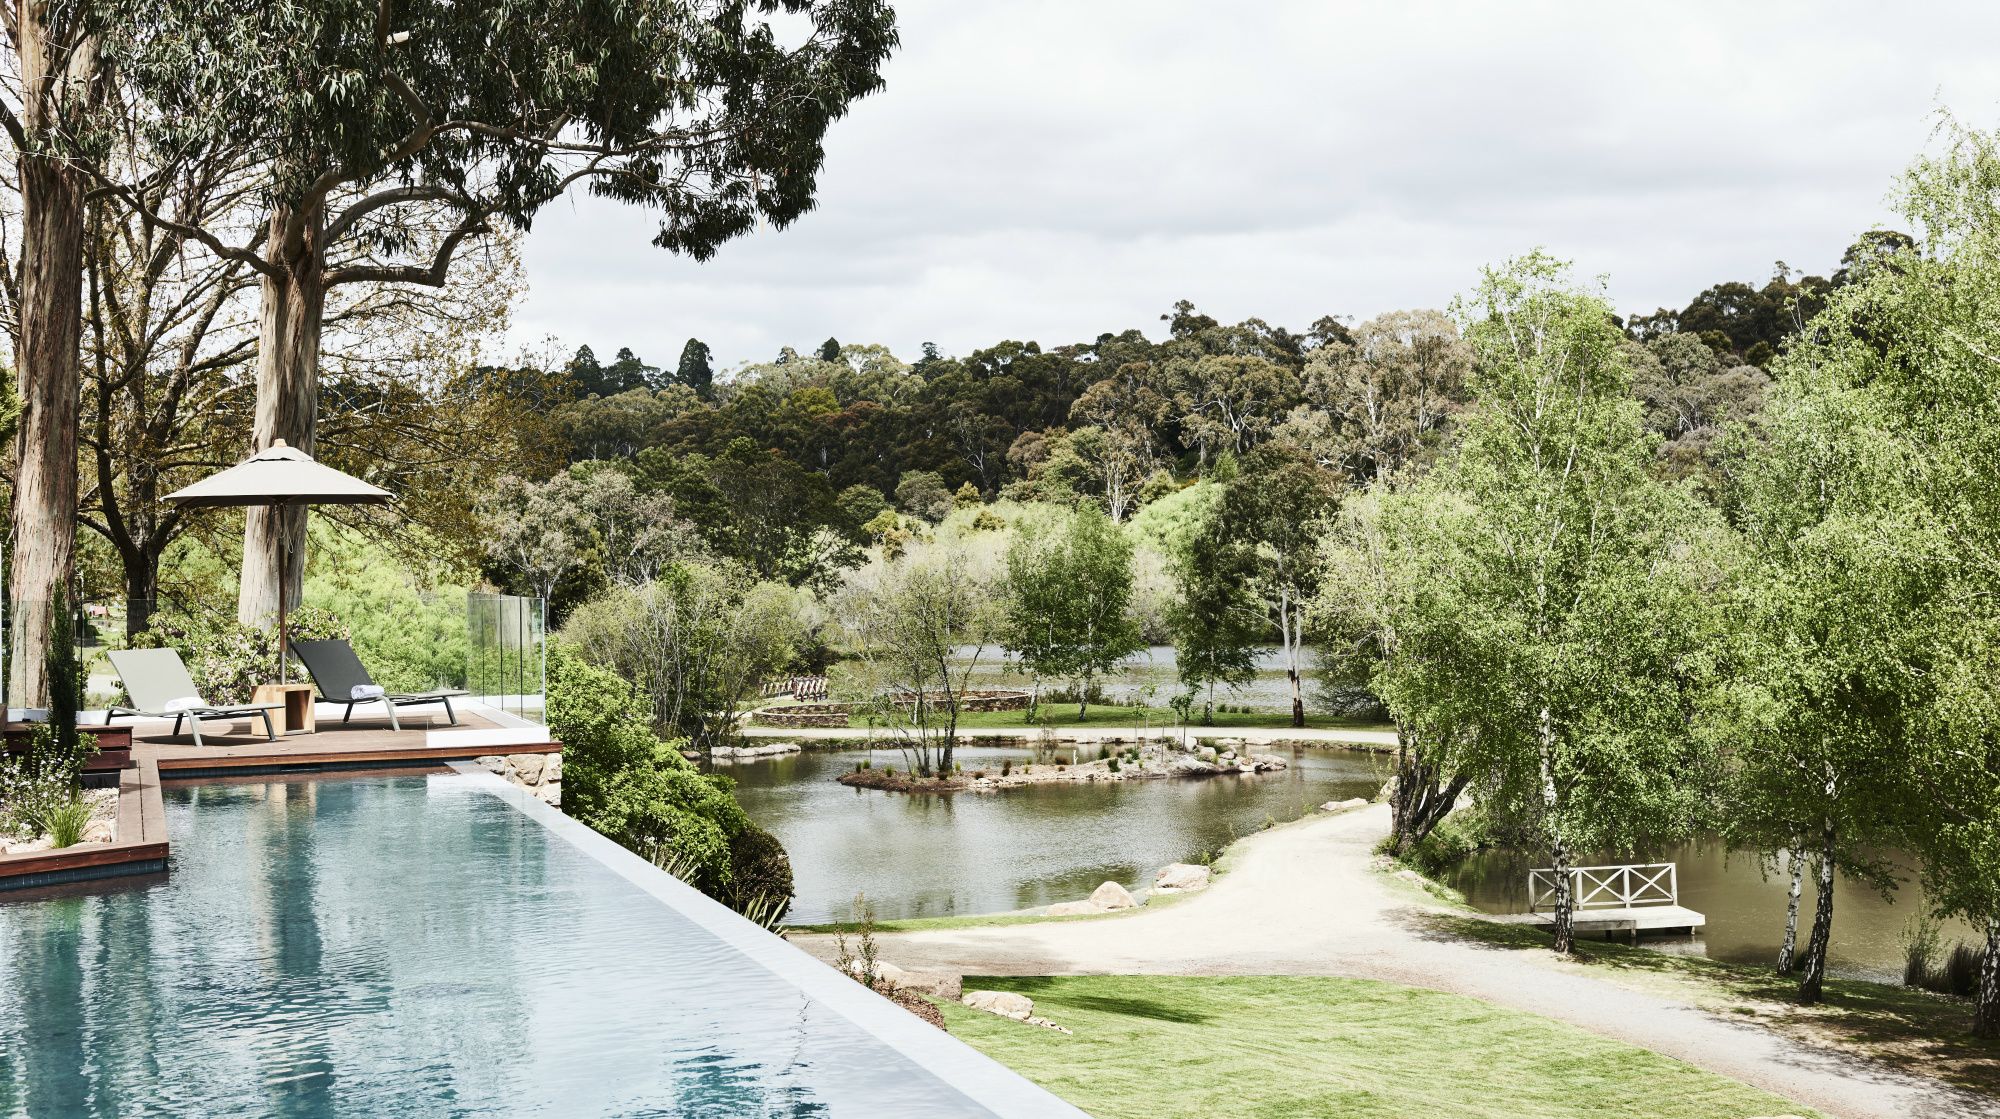 Travel: What to do in a day, a weekend or a week in Daylesford